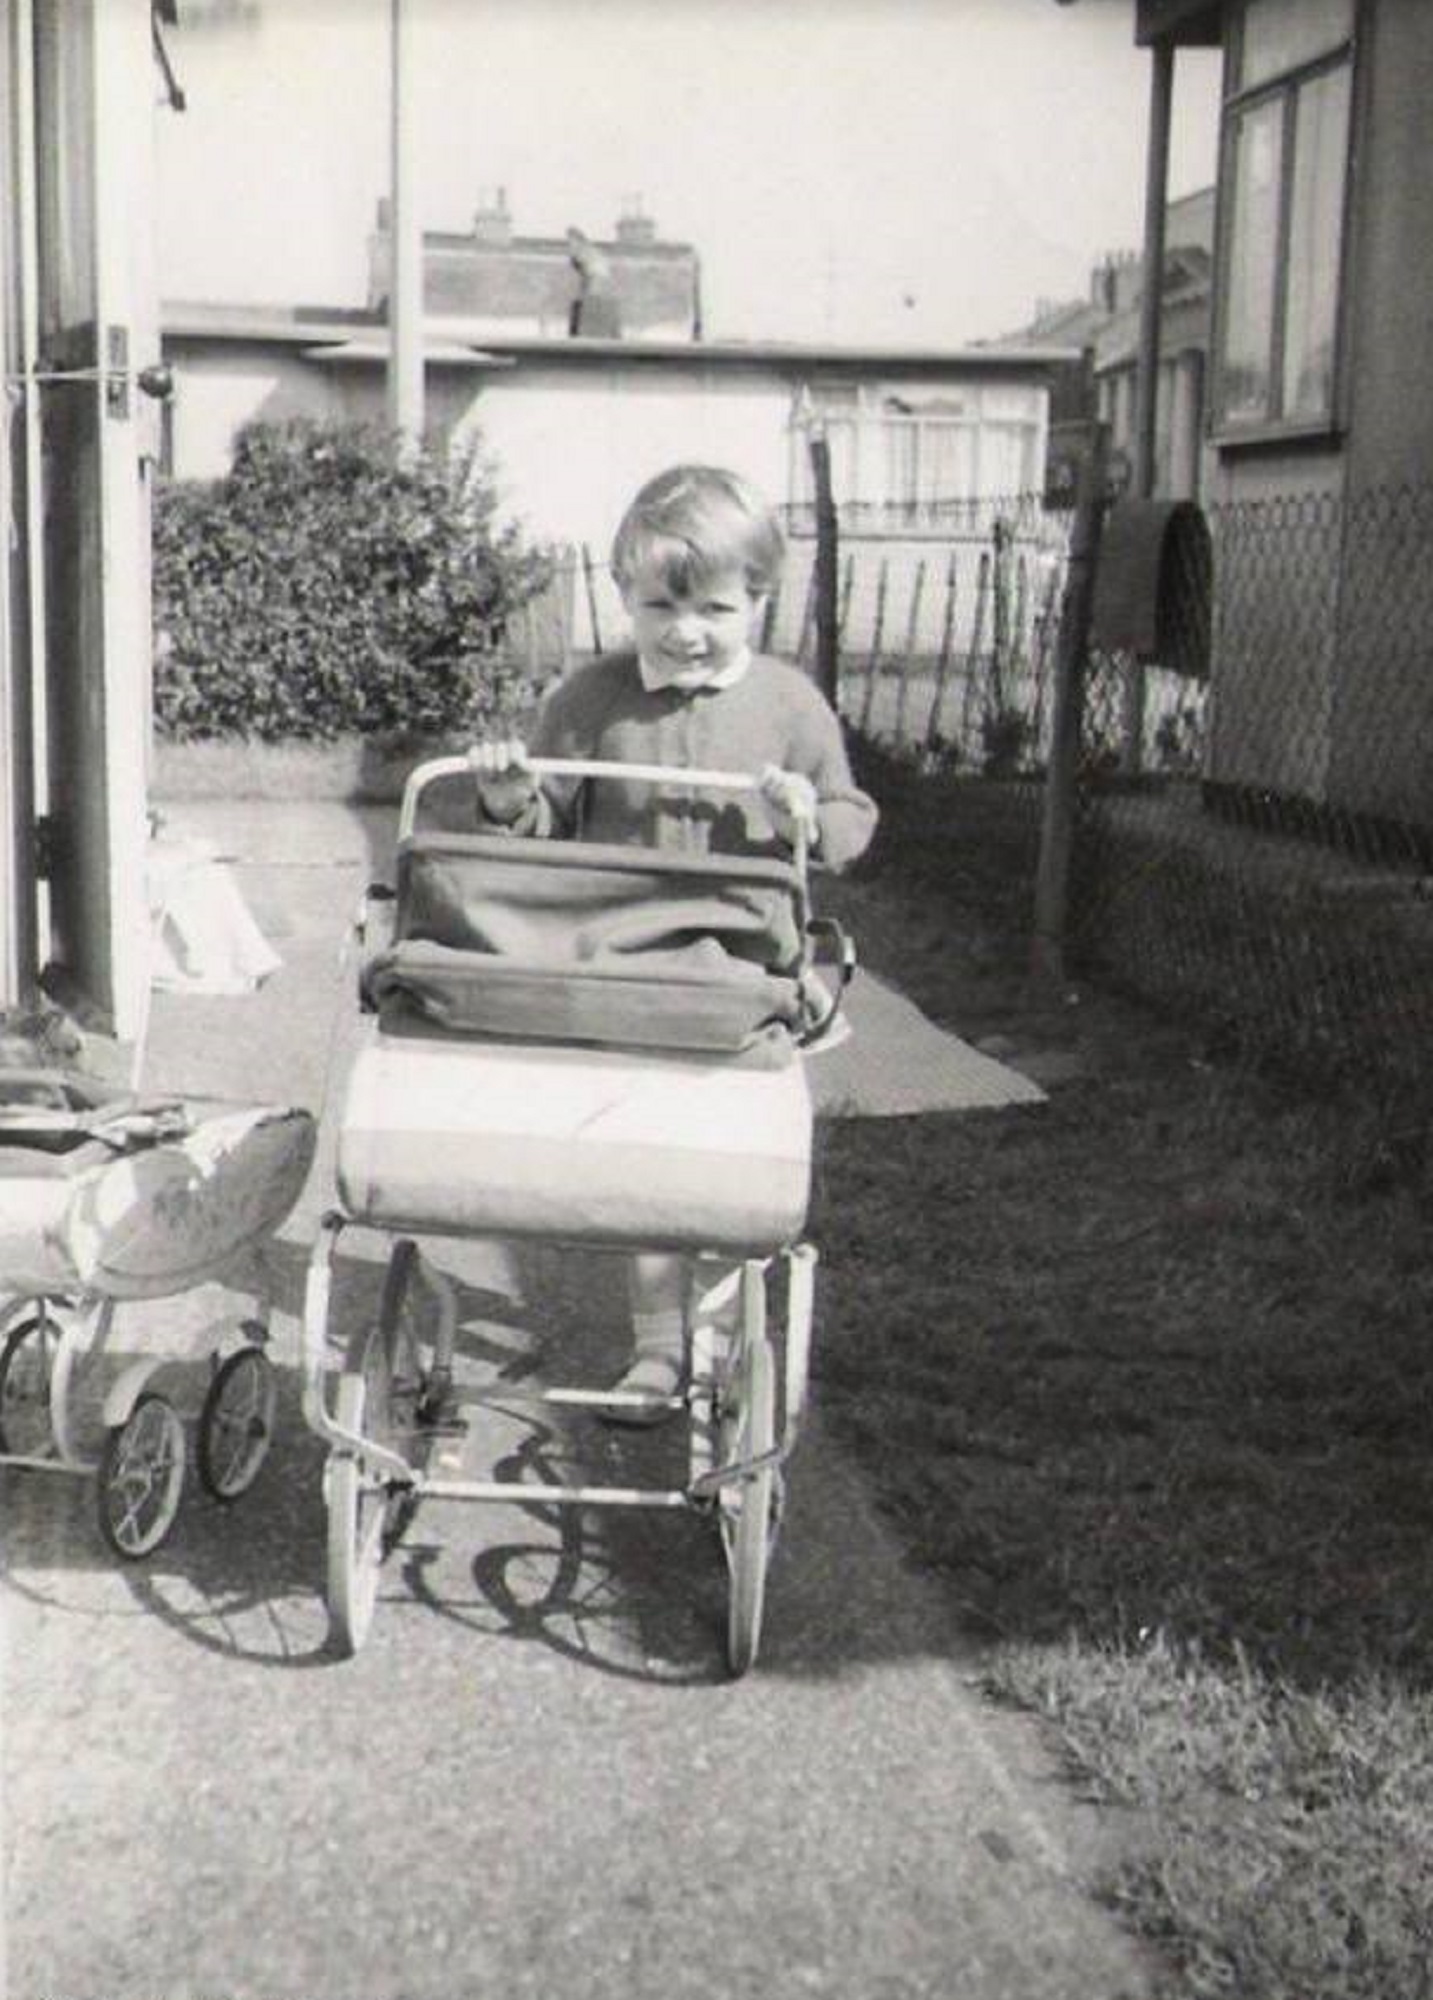 With her pram outside the prefab, No.5 Holmbrook street, off of Brooksbys Walk, London E9